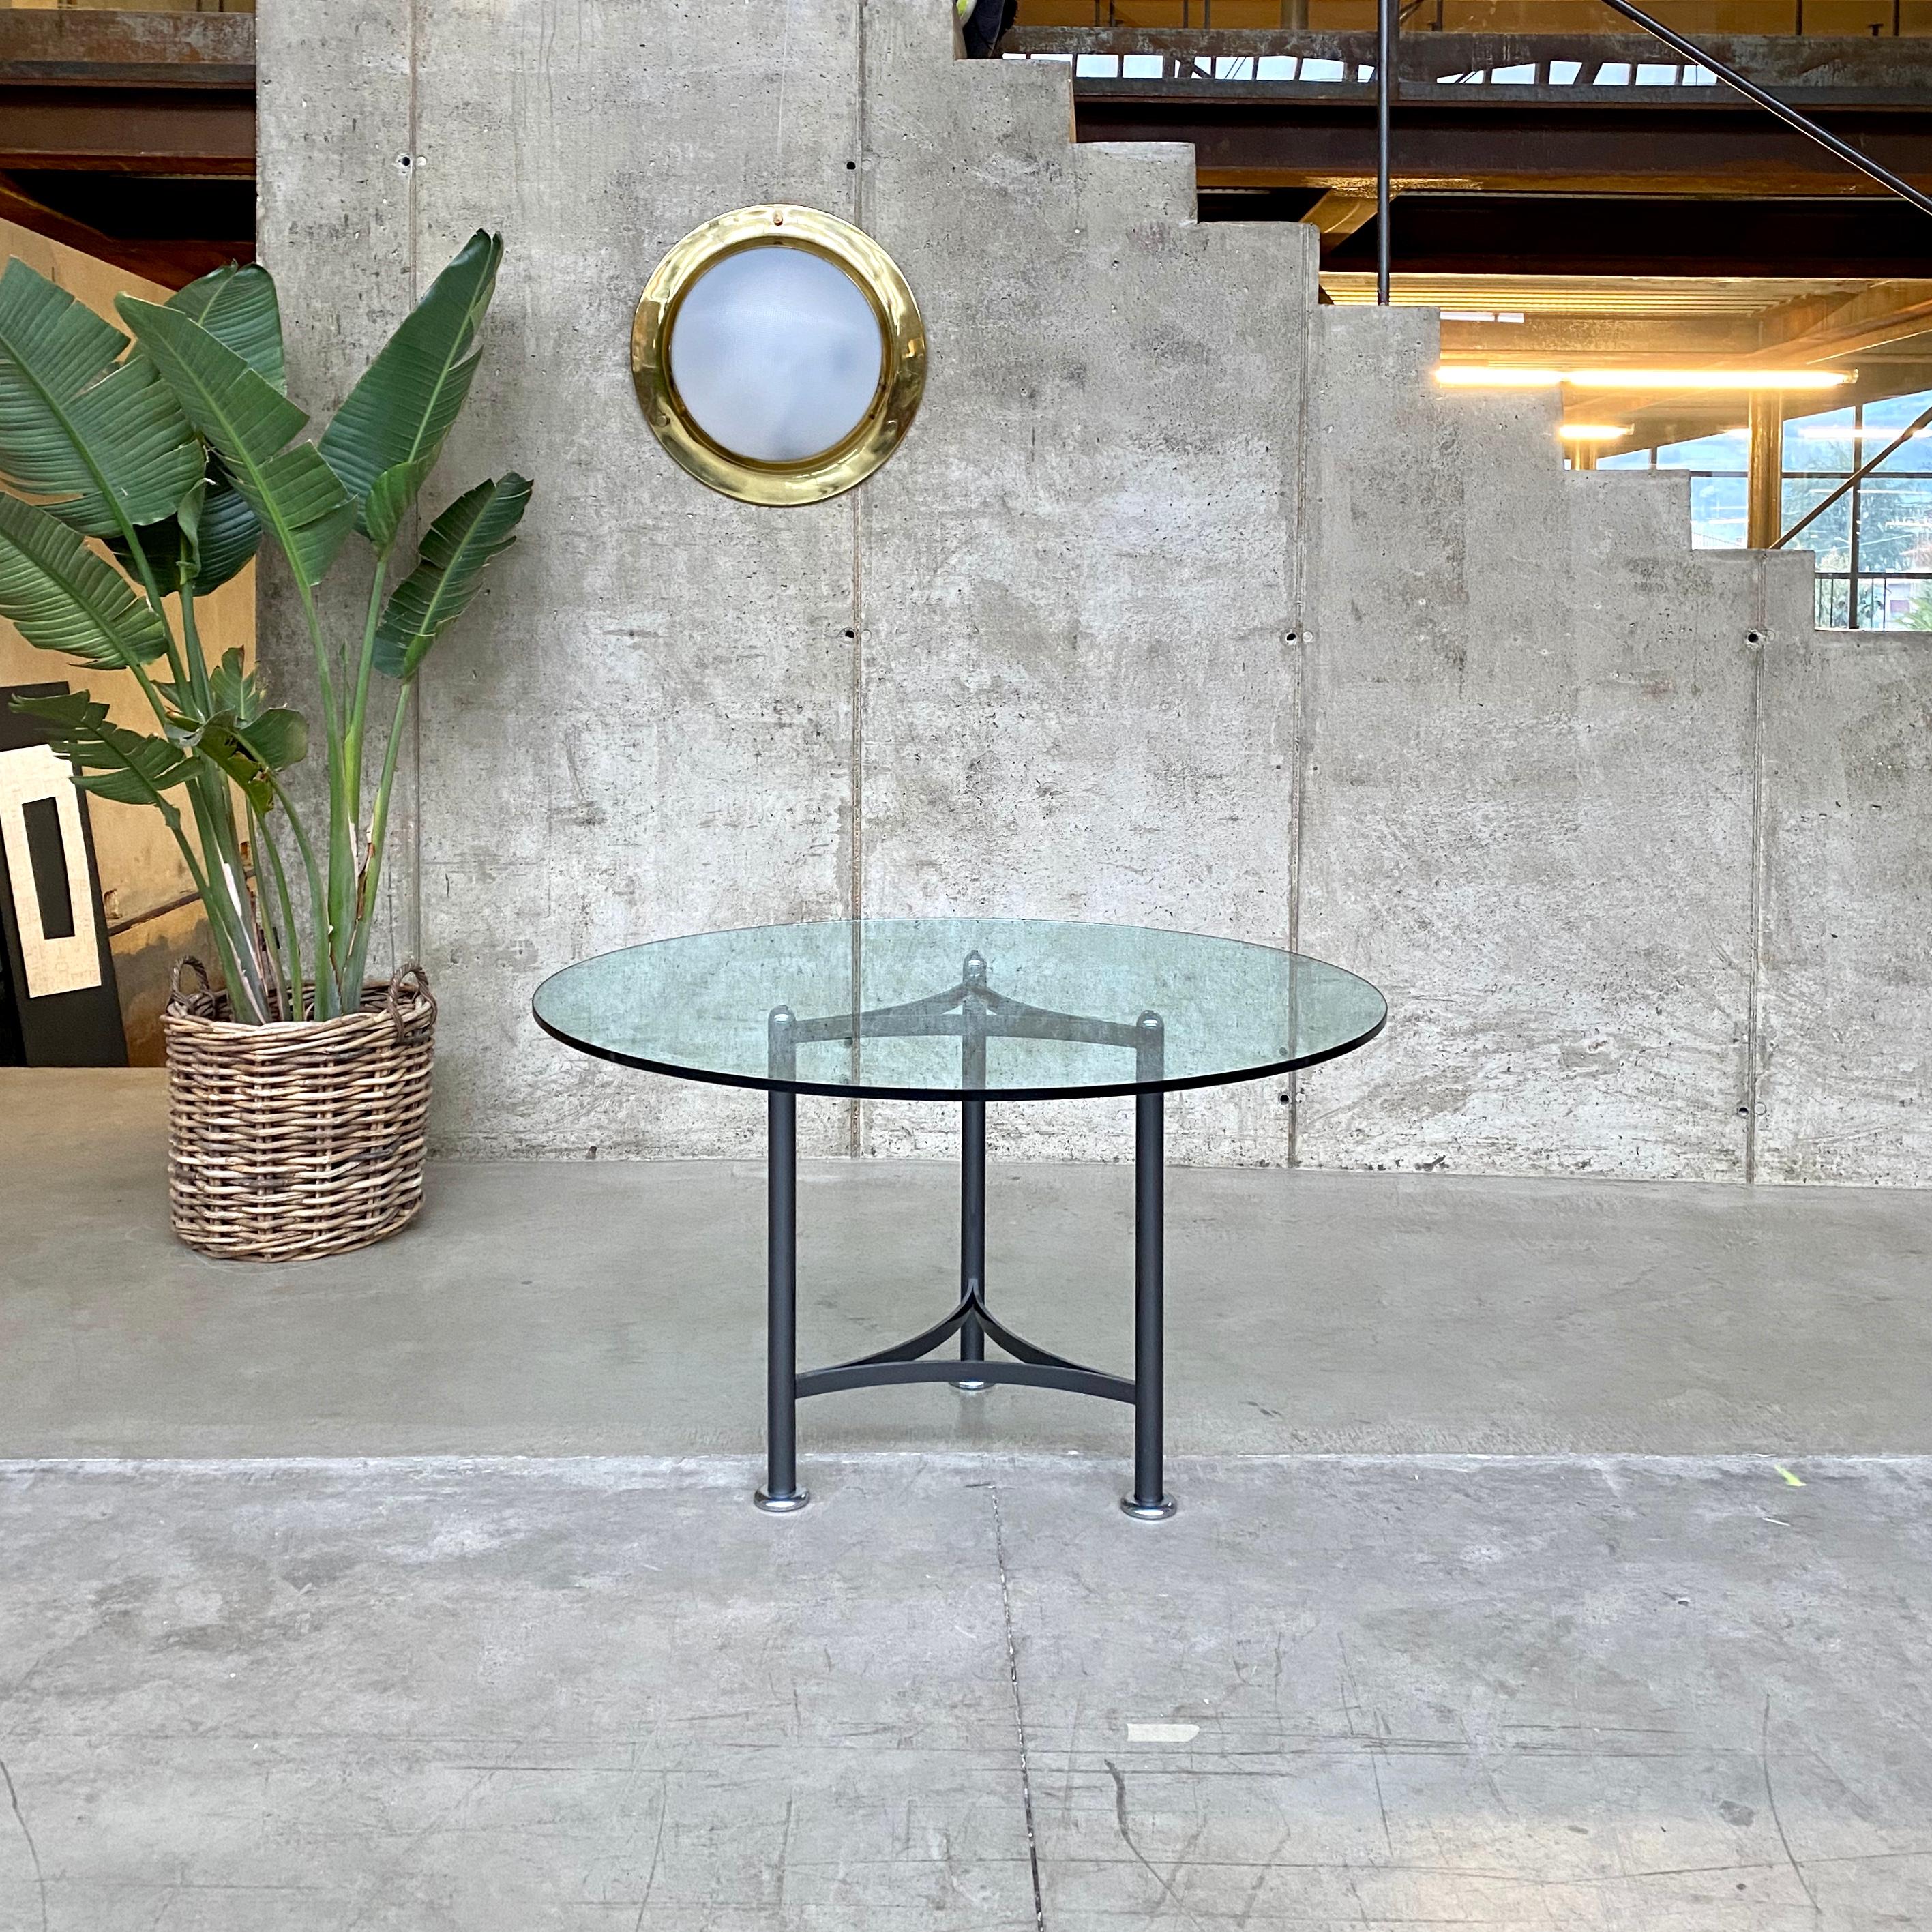 Luigi Caccia Dominioni glass round table for Azucena, 1970

Glass round top on a tubular iron tripod in a dark grey color. Every bar frame ends with the typical Dominioni style smooth feet. The chromed half-sphere as feet and top side creates a